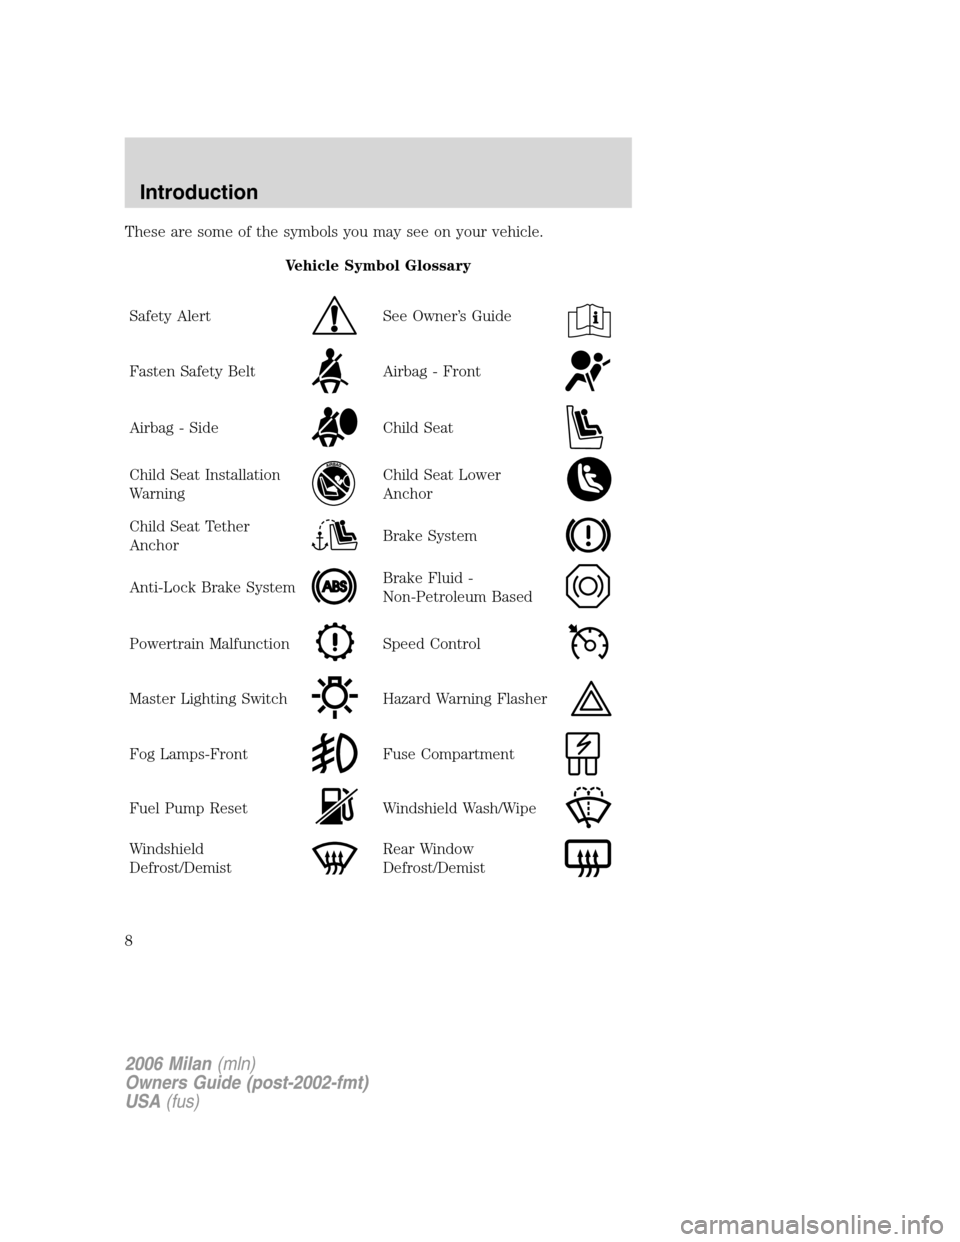 Mercury Milan 2006  Owners Manuals These are some of the symbols you may see on your vehicle.
Vehicle Symbol Glossary
Safety Alert
See Owner’s Guide
Fasten Safety BeltAirbag - Front
Airbag - SideChild Seat
Child Seat Installation
War